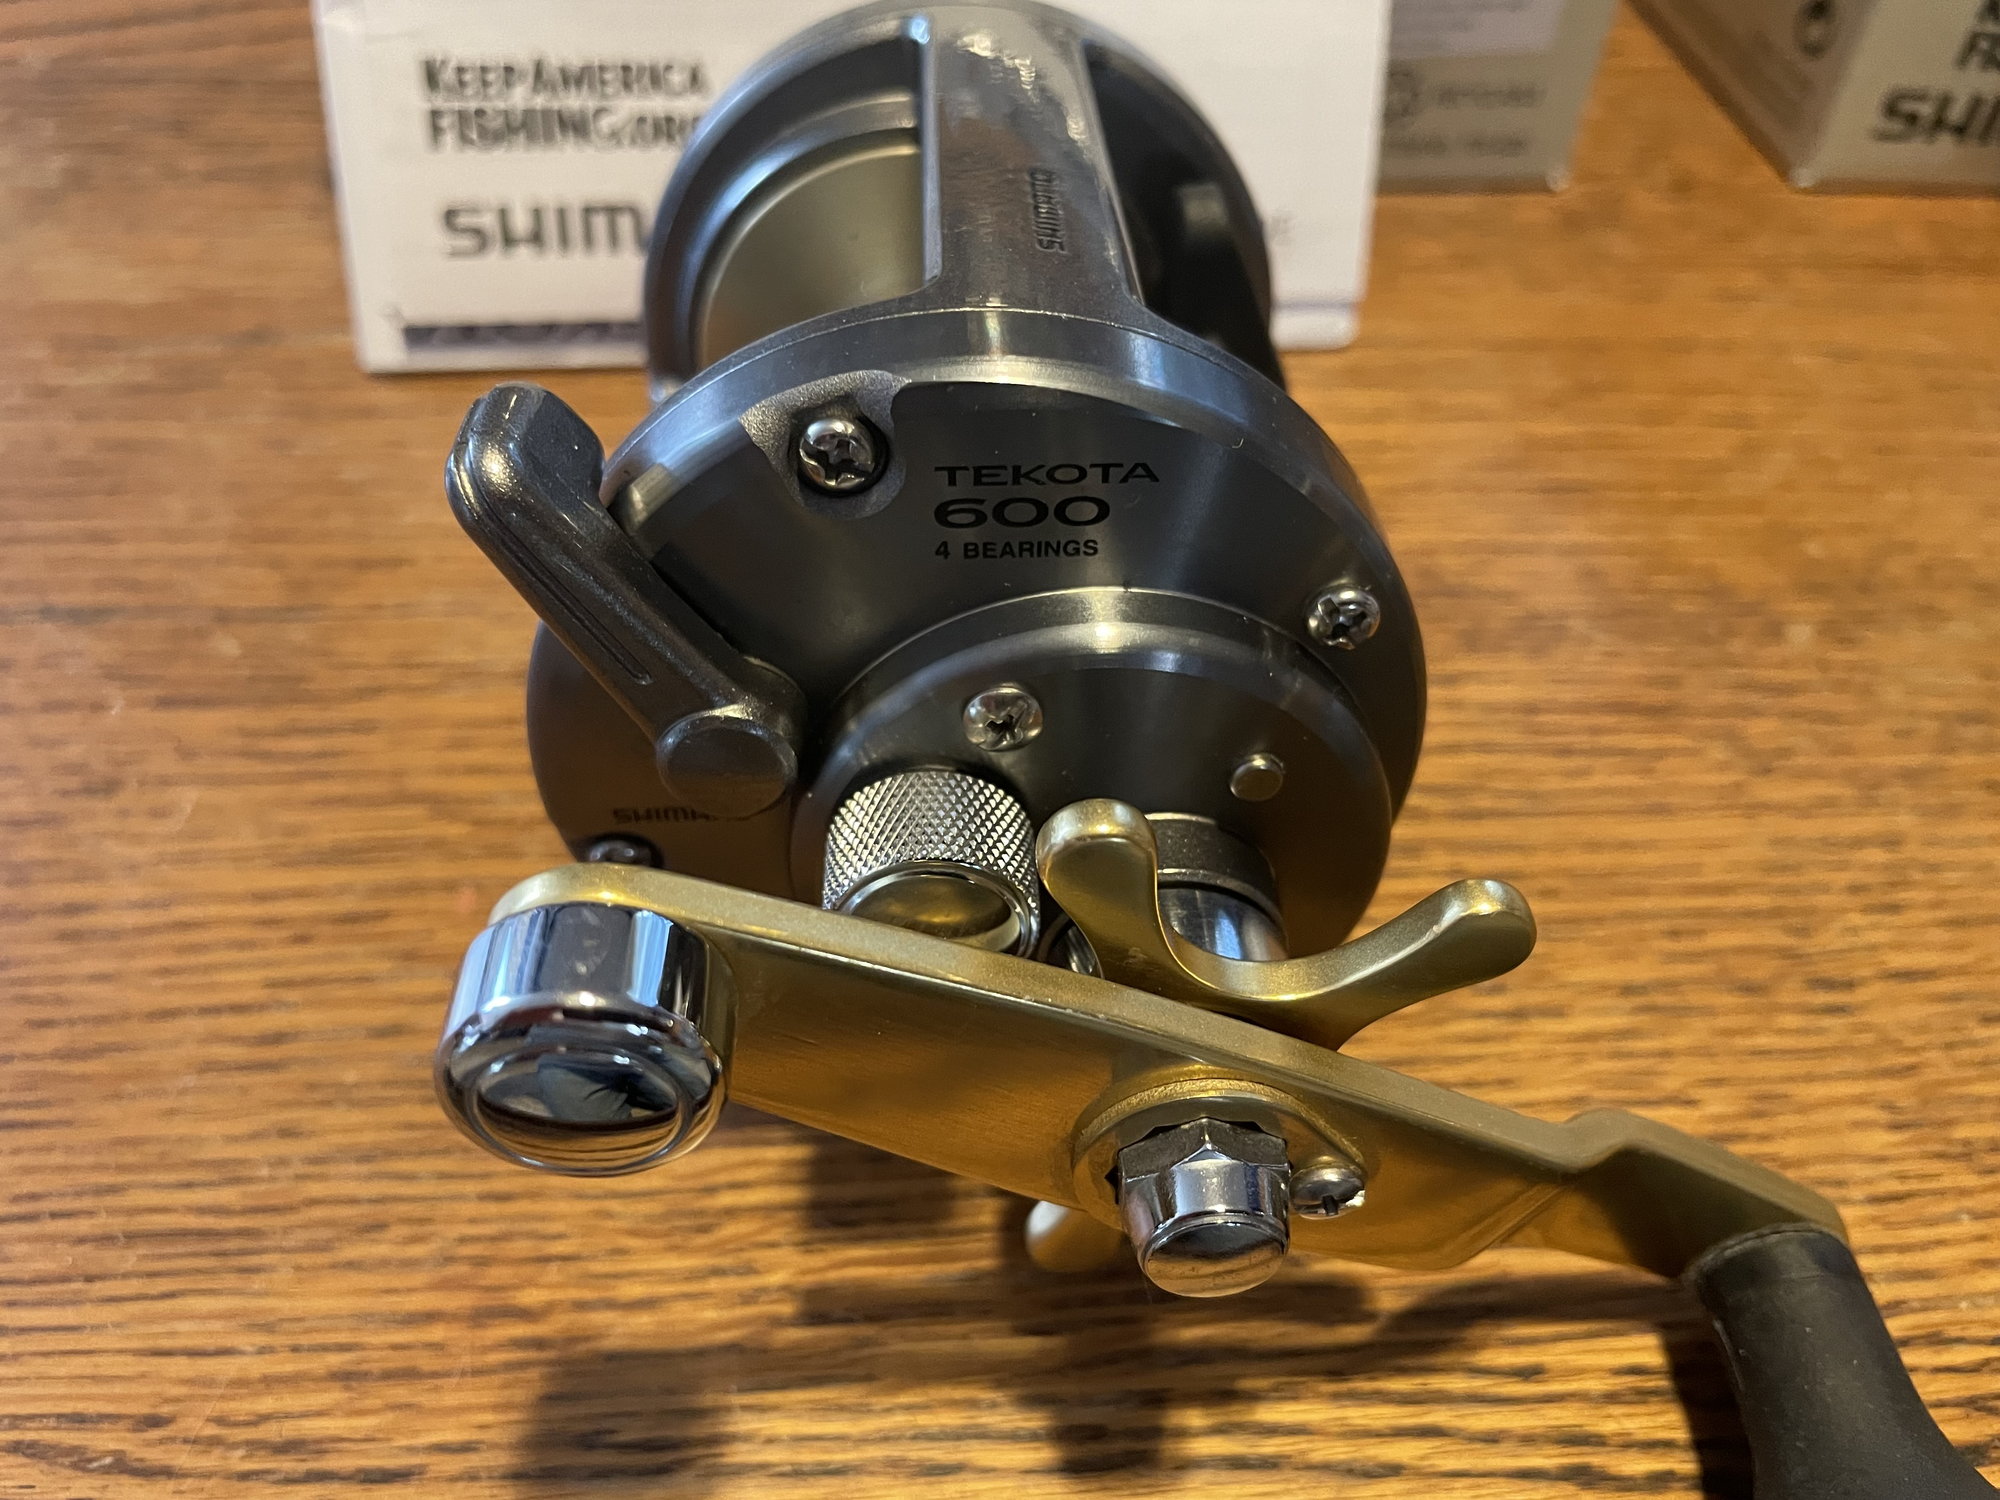 Shimano Tekota 600 pair for sale - almost perfect condition - The